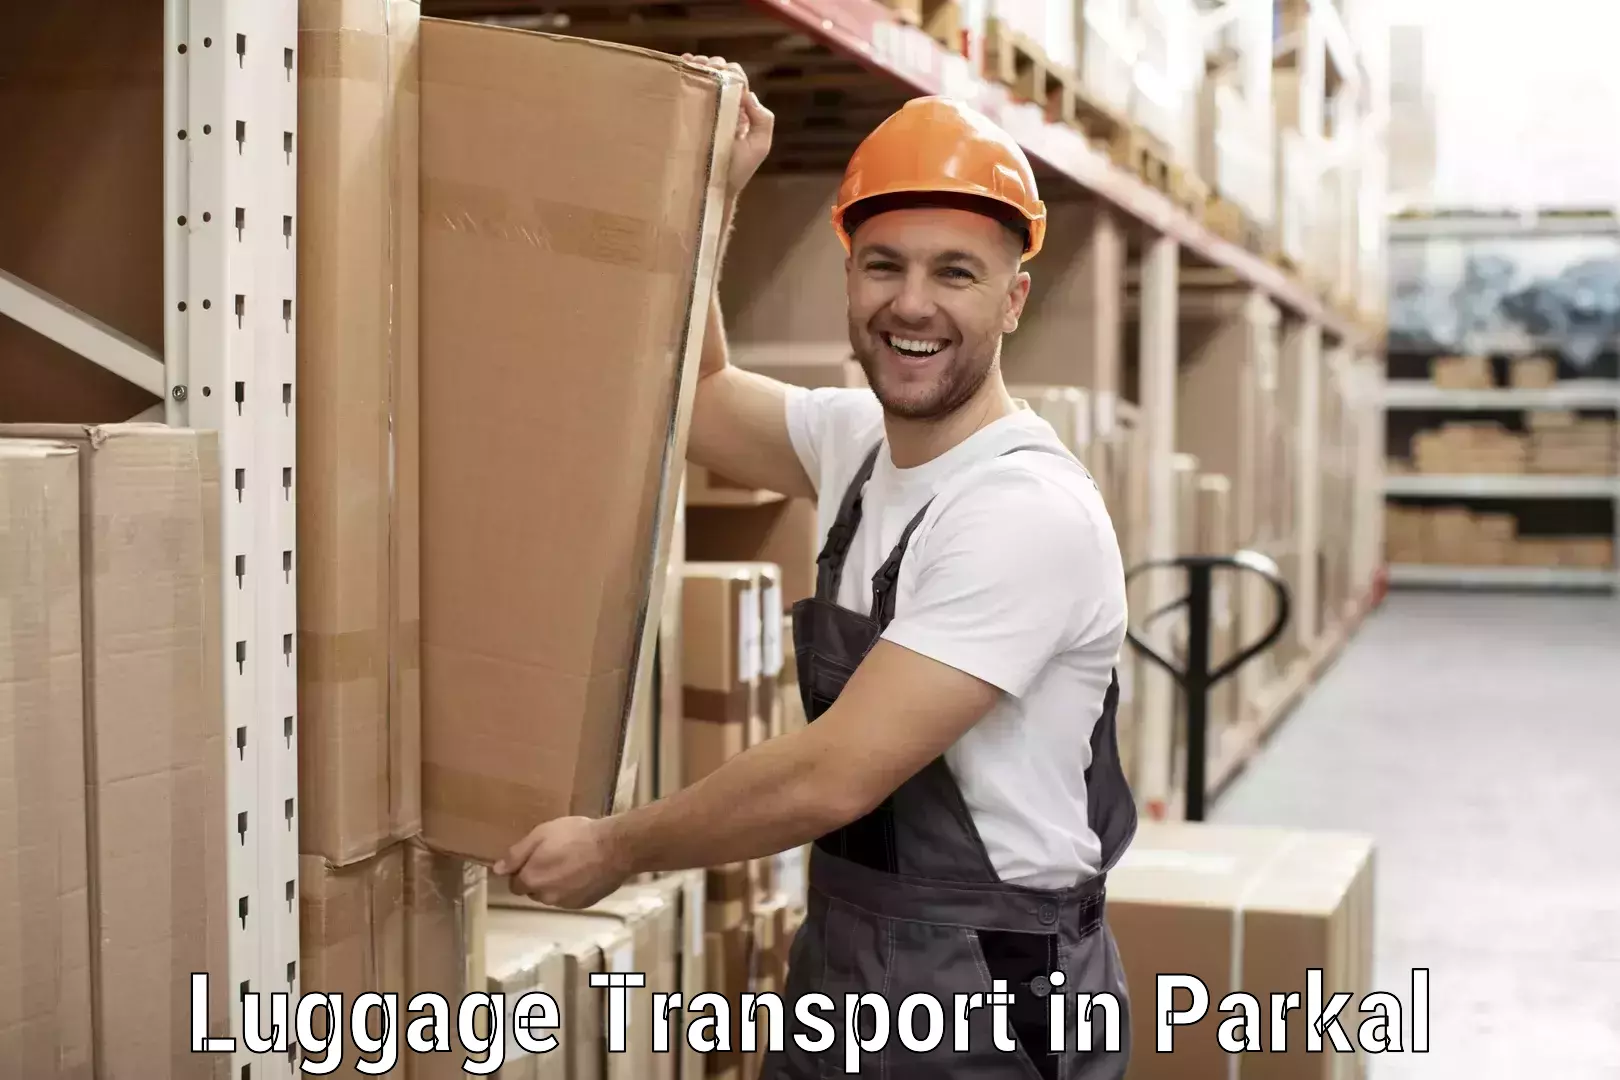 Luggage transport consultancy in Parkal